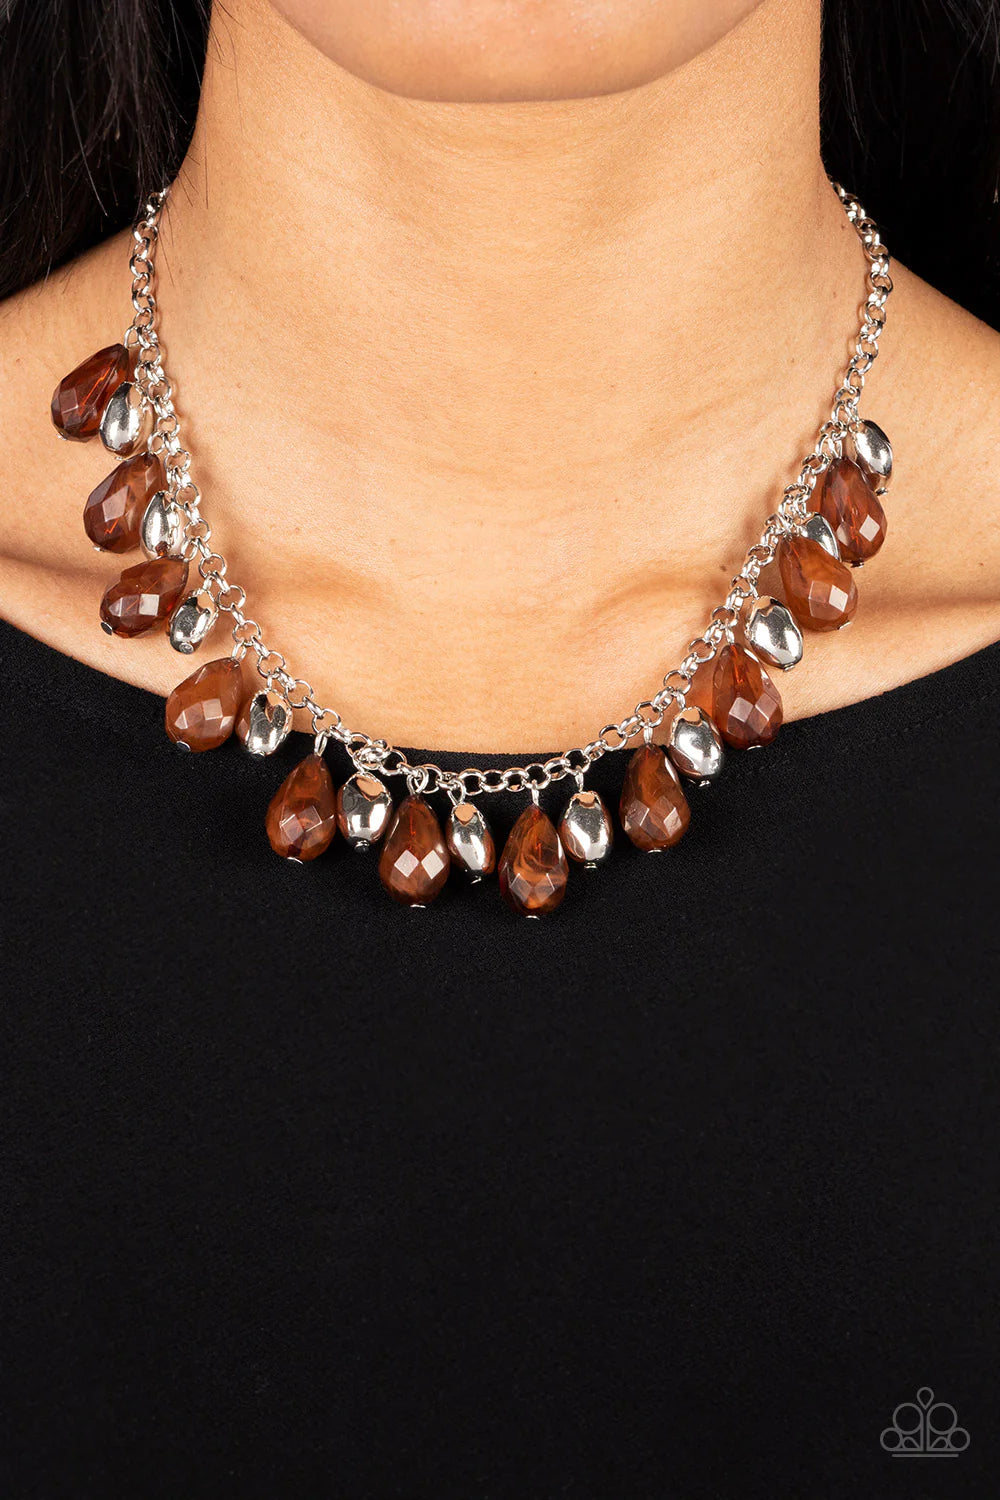 Paparazzi Accessories Summertime Tryst - Brown Featuring a faceted shimmer, opaque brown teardrop beads alternate with imperfect silver beads along a classic silver chain, swaying into a colorful fringe below the collar. Features an adjustable clasp closu